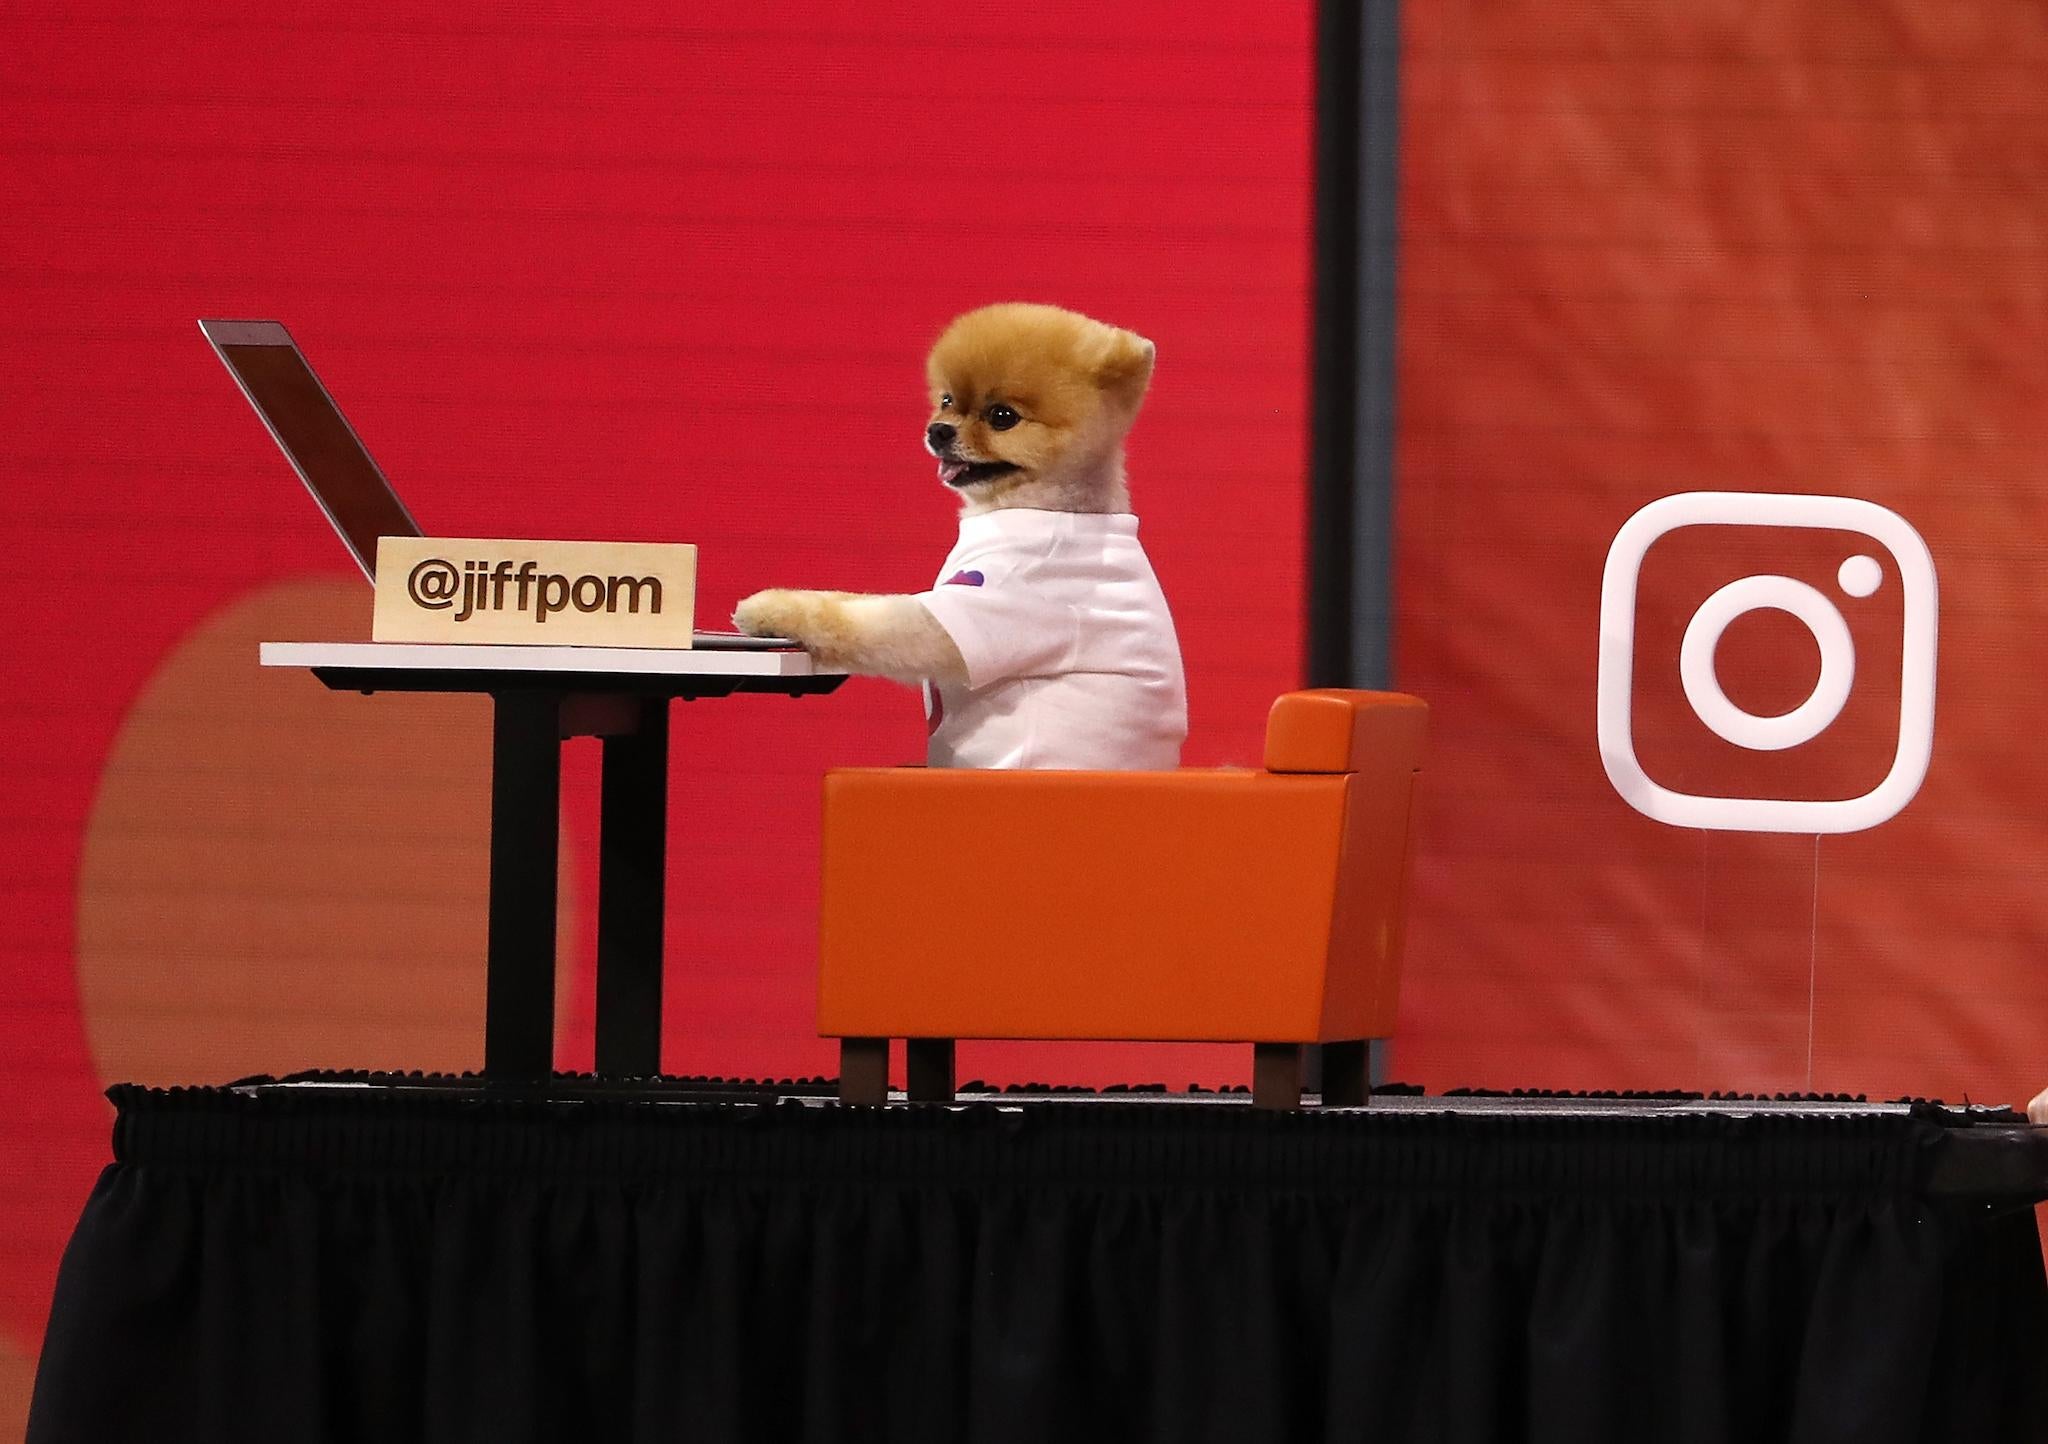 Instagram star user JiffPom appears during the F8 Facebook Developers conference on May 1, 2018 in San Jose, California